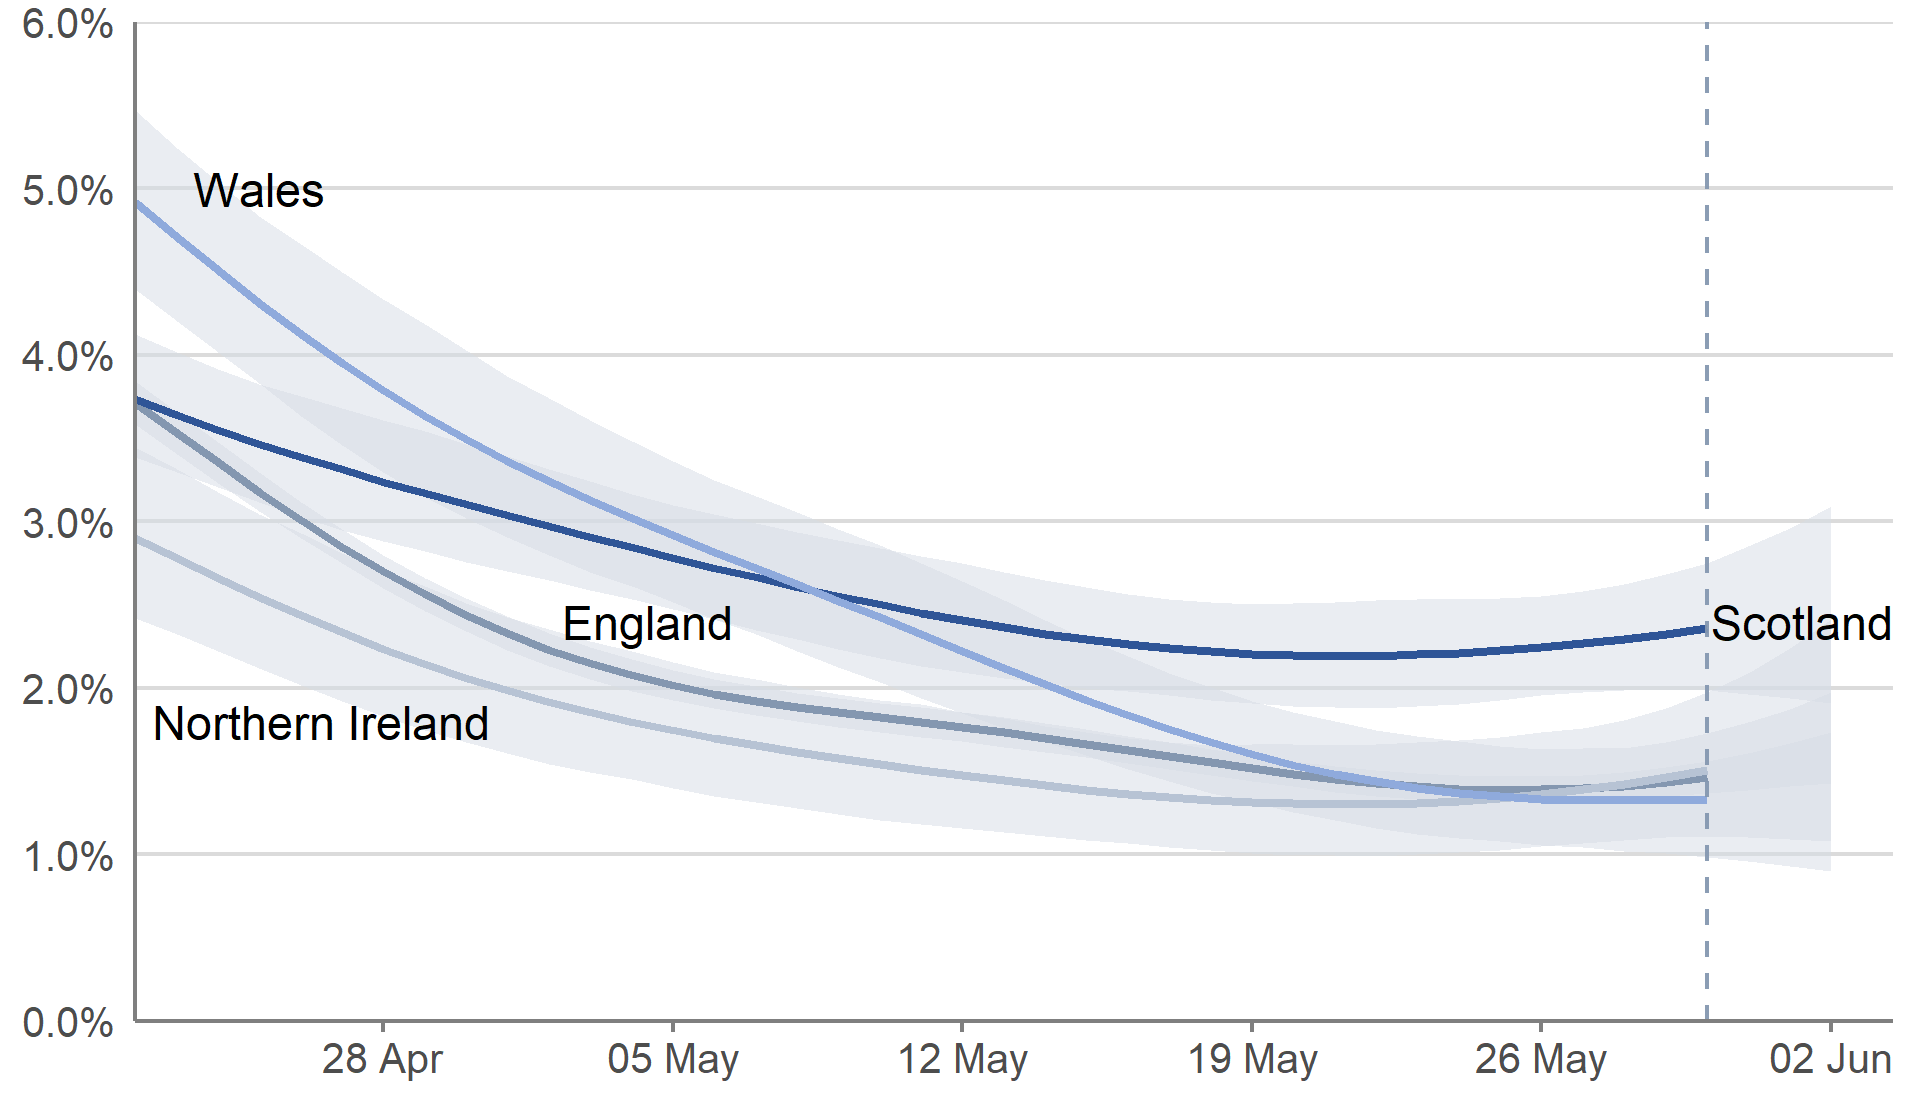 A line chart showing modelled daily estimates of the percentage of the population testing positive for COVID-19 in each of the four nations of the UK, between 22 April and 2 June 2022. Modelled daily estimates are represented by four lines with 95% credible intervals in pale blue shading. The lines are dark blue for Scotland, light blue for Wales, dark grey for England and light grey for Northern Ireland. In the most recent week, there were early signs of a possible increase in the estimated percentage of people testing positive for COVID-19 in England and Northern Ireland, and the trend was uncertain in Wales and Scotland.